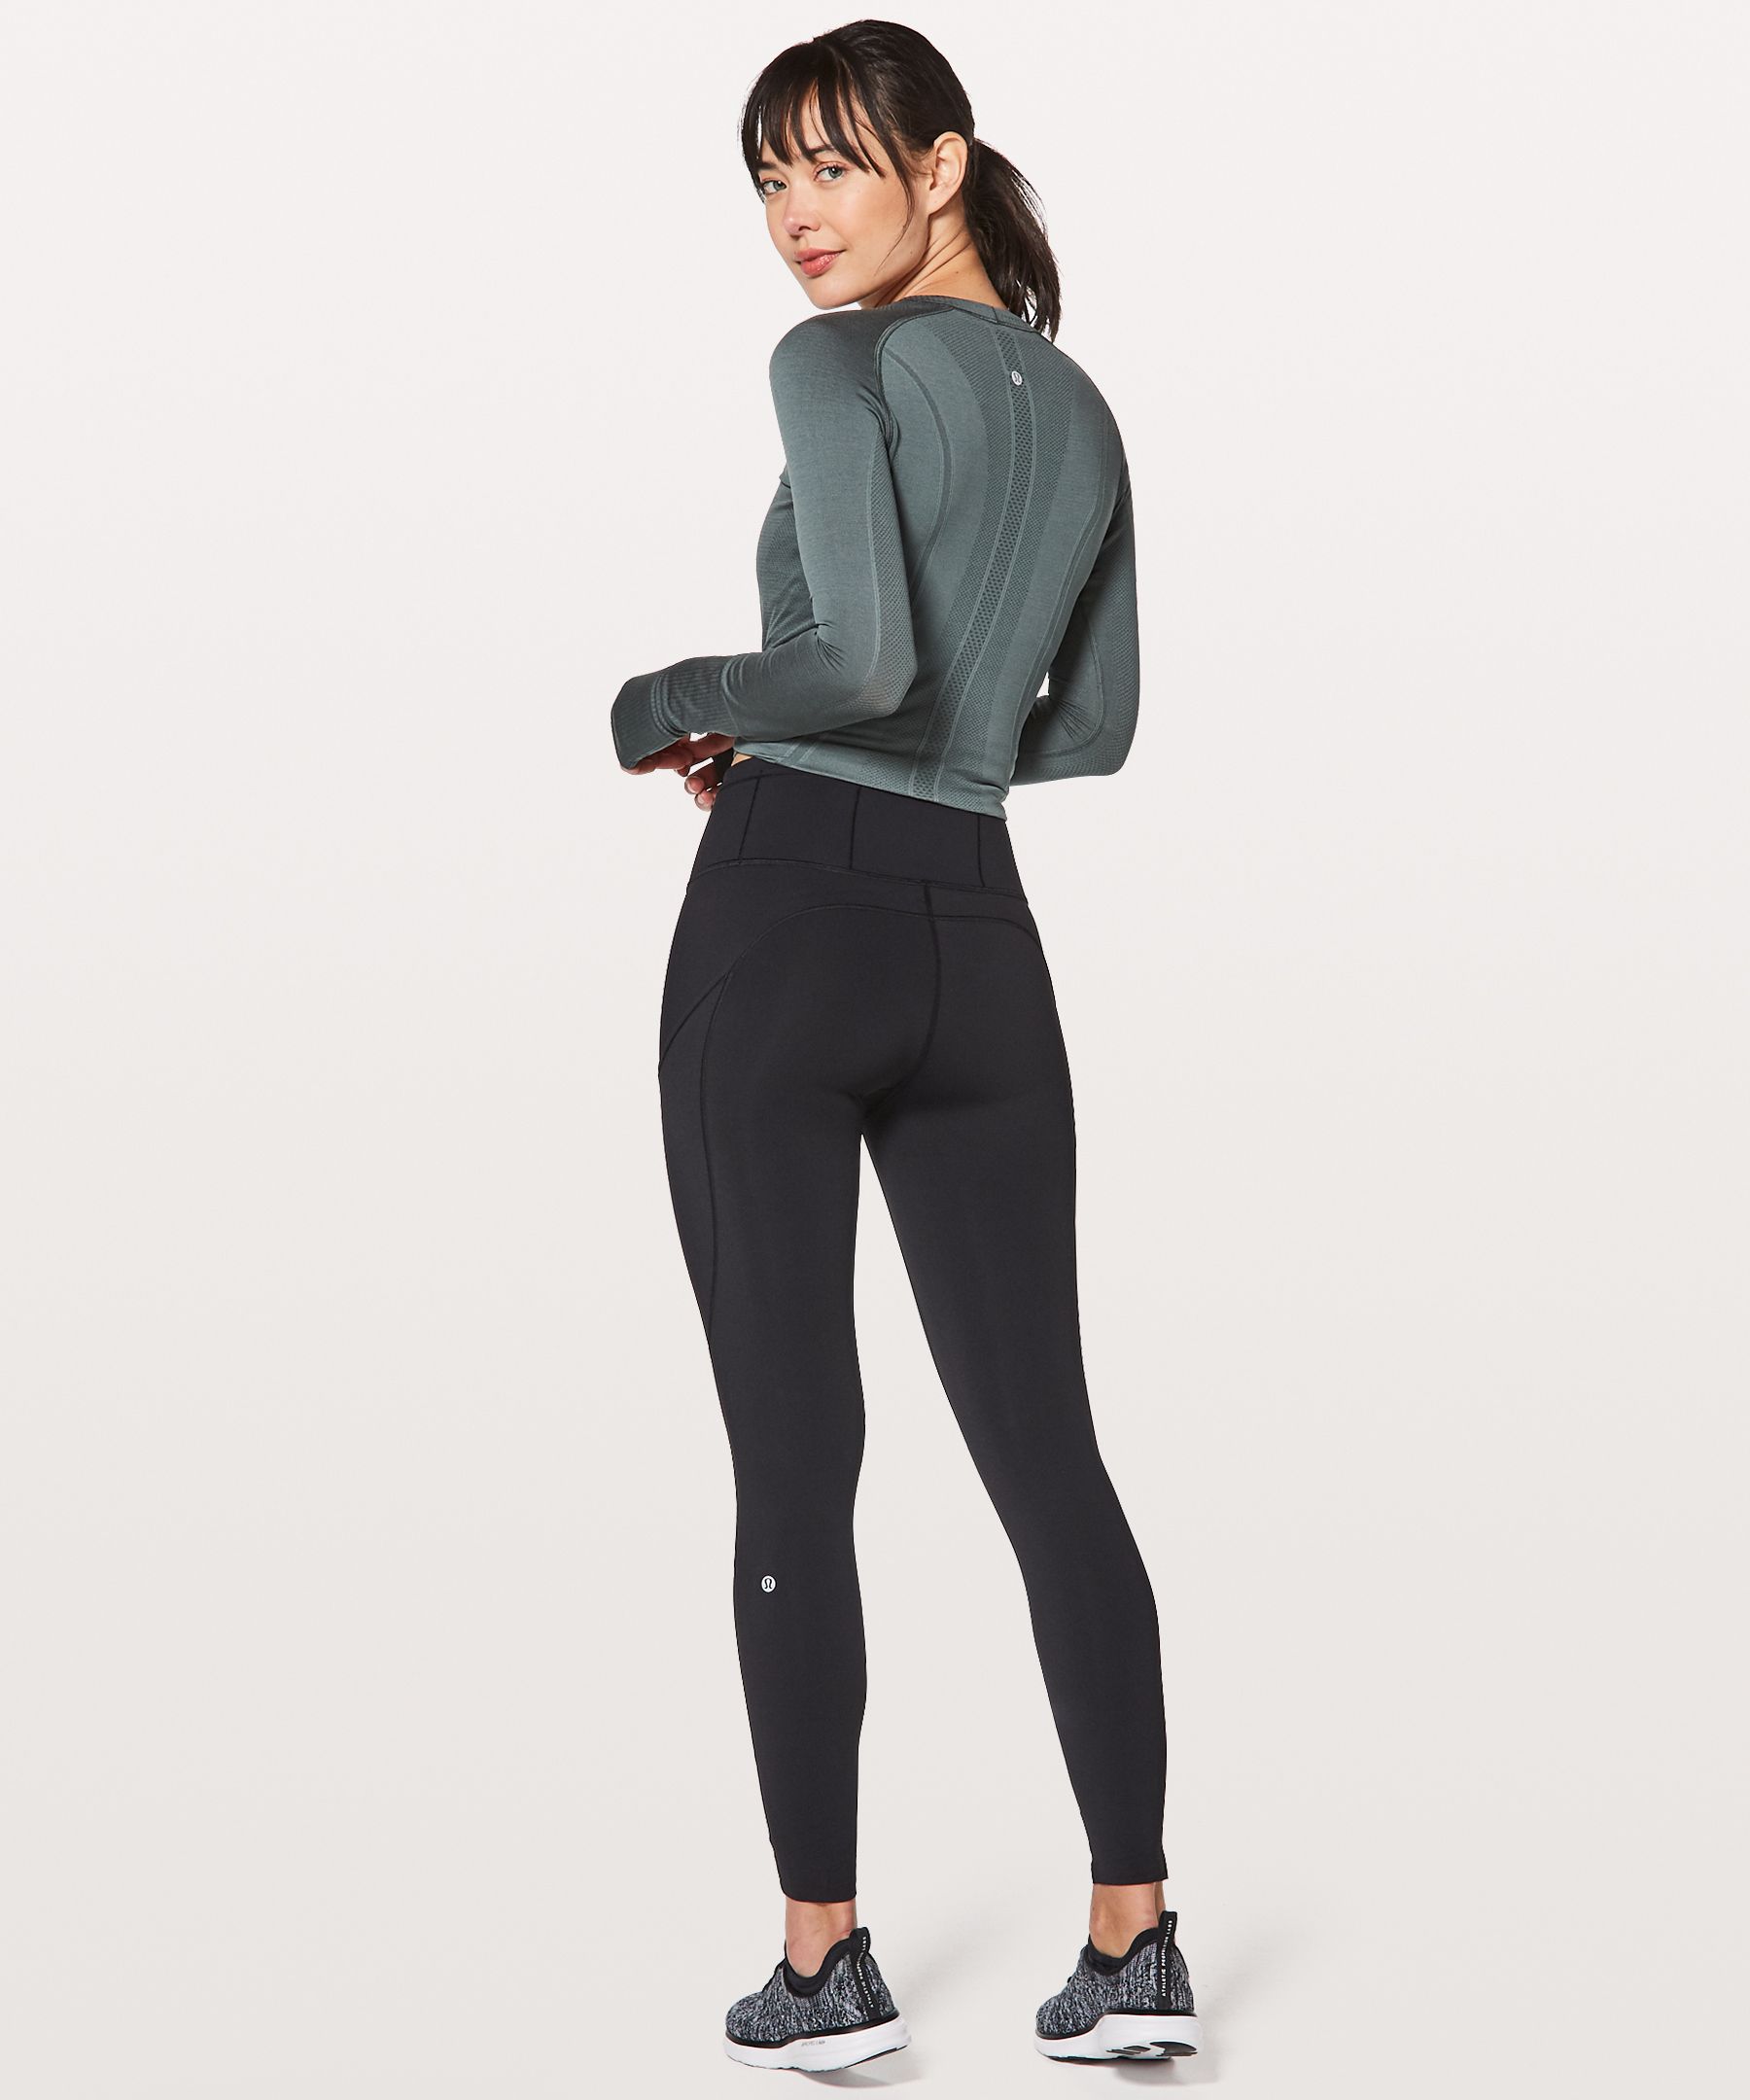 Lululemon Fast and Free 7/8 Tight ll Nulux 25”Size 4 Interfaced Starligh… -  $54 - From amazing